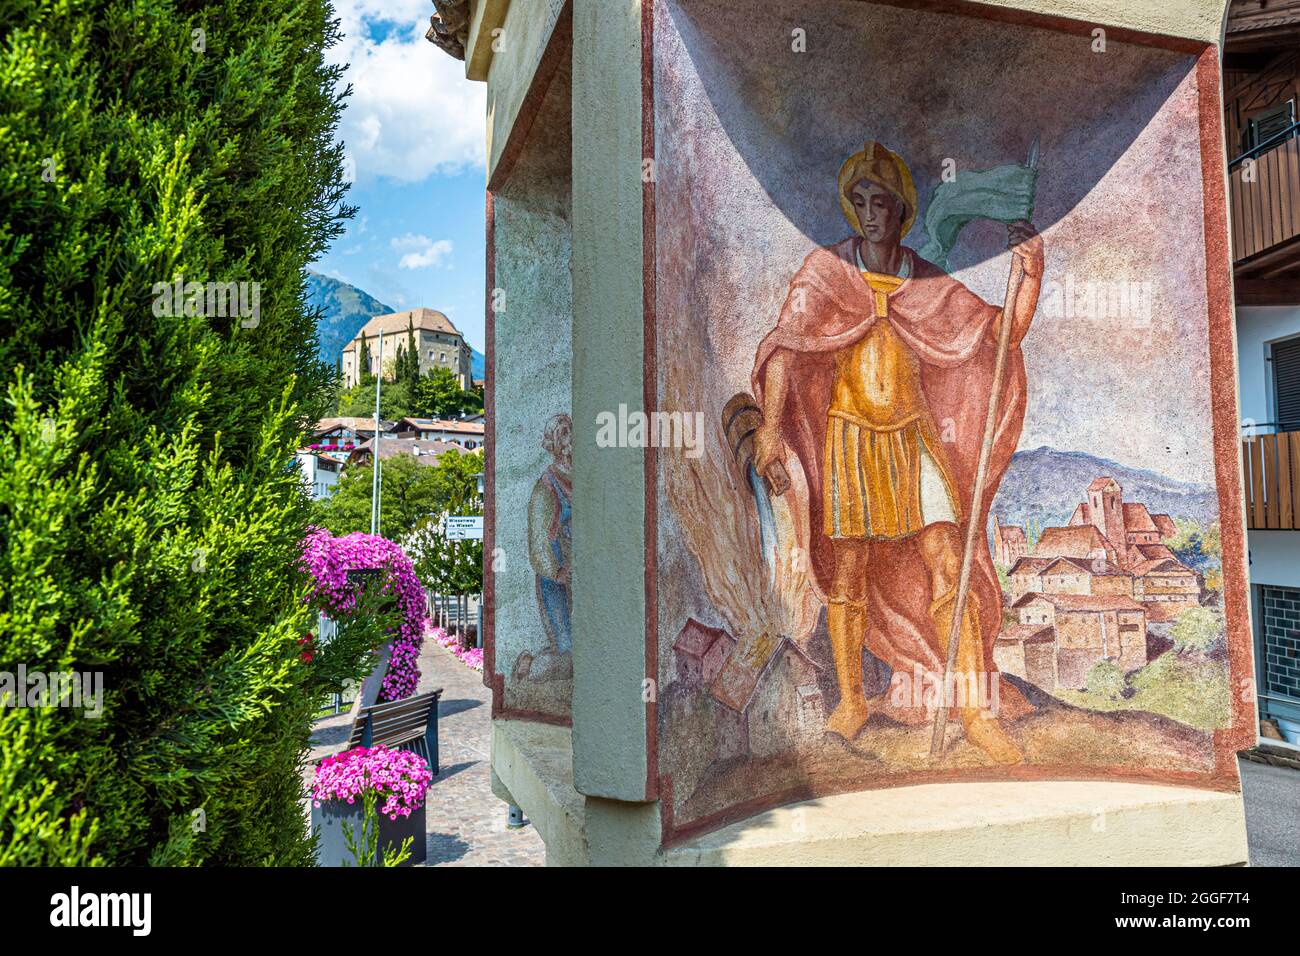 Monument to St. Florian, the patron saint of the fire department in Schenna, South Tyrol, Italy Stock Photo